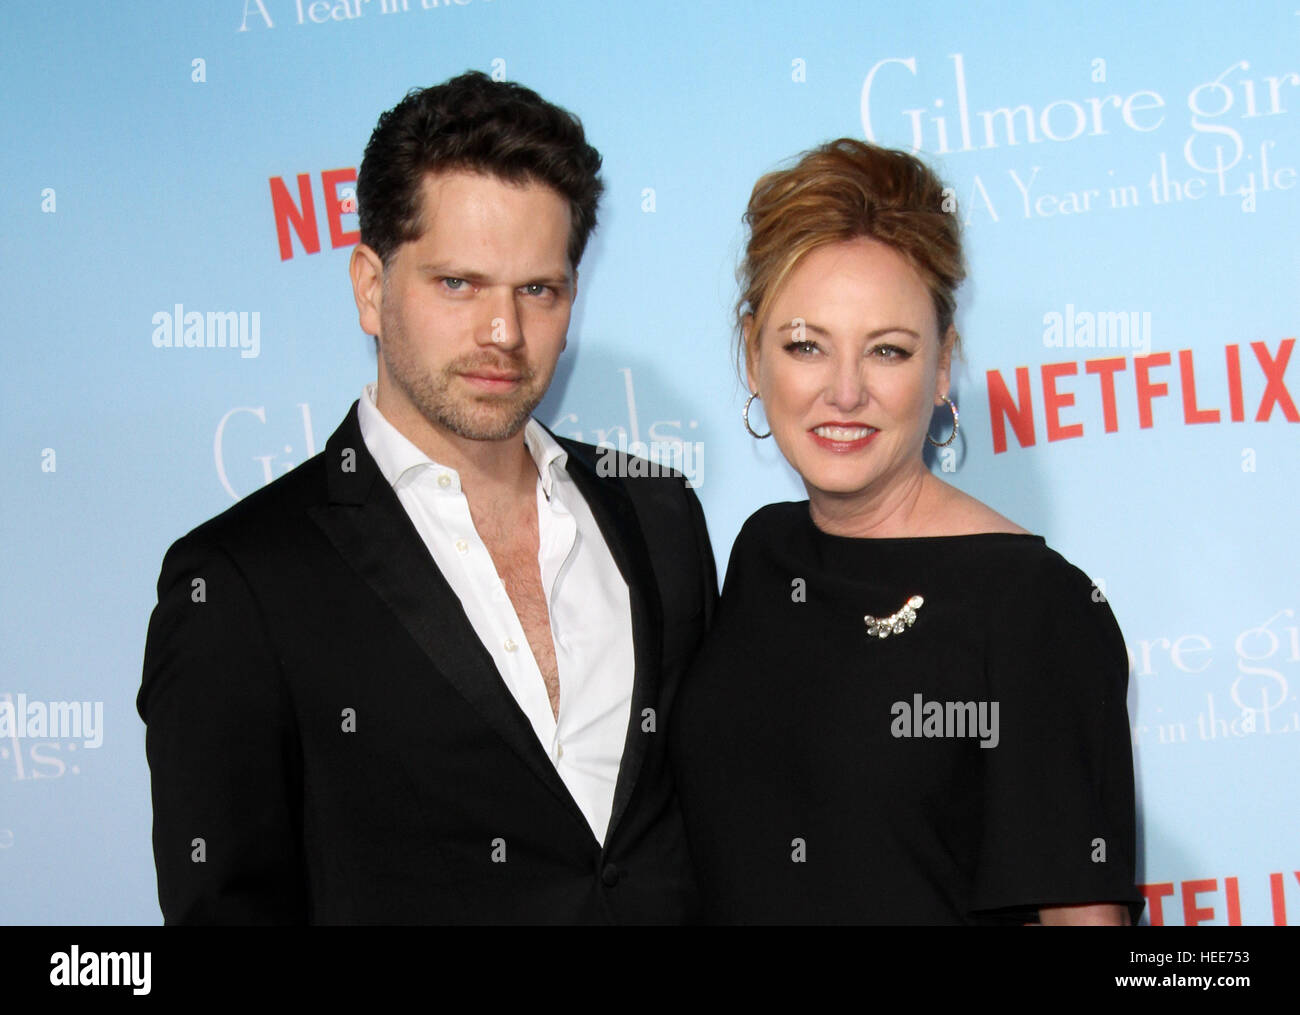 Netflix’s Gilmore Girls: A Year in the Life Premiere Event held at the Fox Bruin Theater  Featuring: Nick Holmes, Virginia Madsen Where: Los Angeles, California, United States When: 18 Nov 2016 Stock Photo